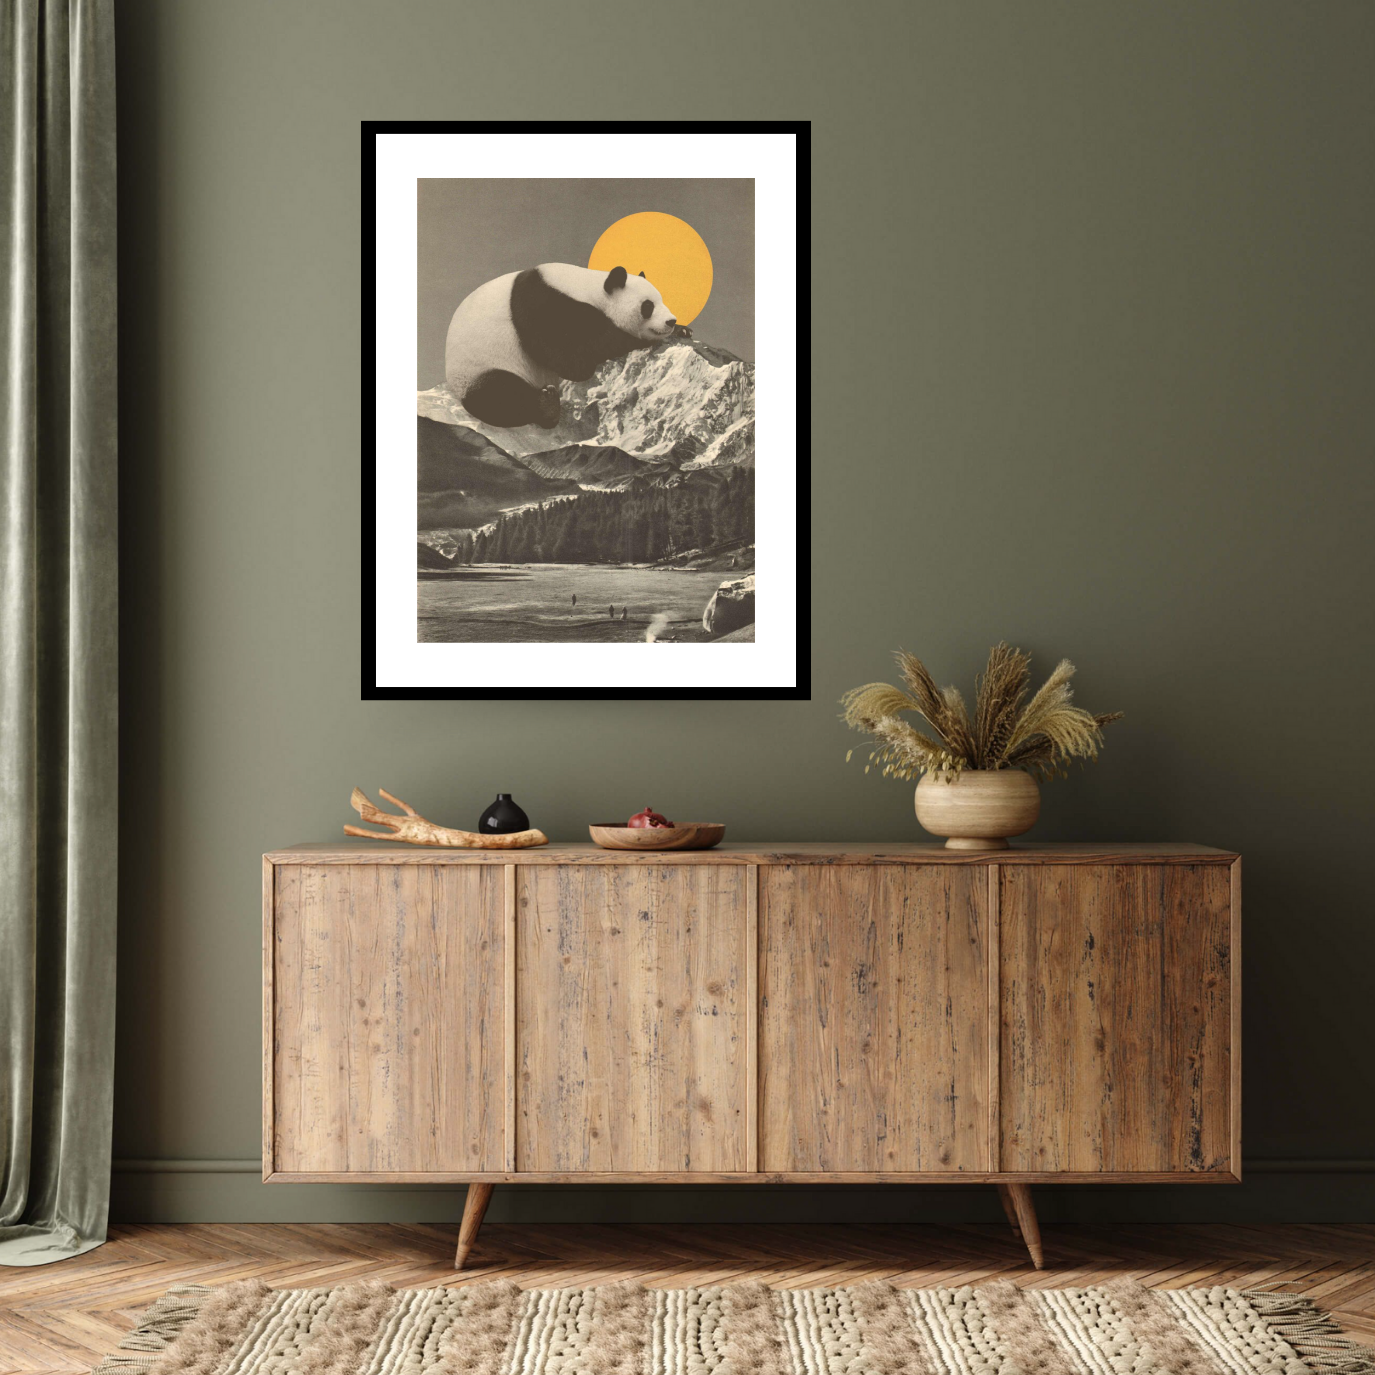 Black framed archival print: 'Pandas Nap into Mountains, 2020' by Florent Bodart. A panda rests atop snowy peaks under a golden sun. Printed on Hahnemühle German etching paper.